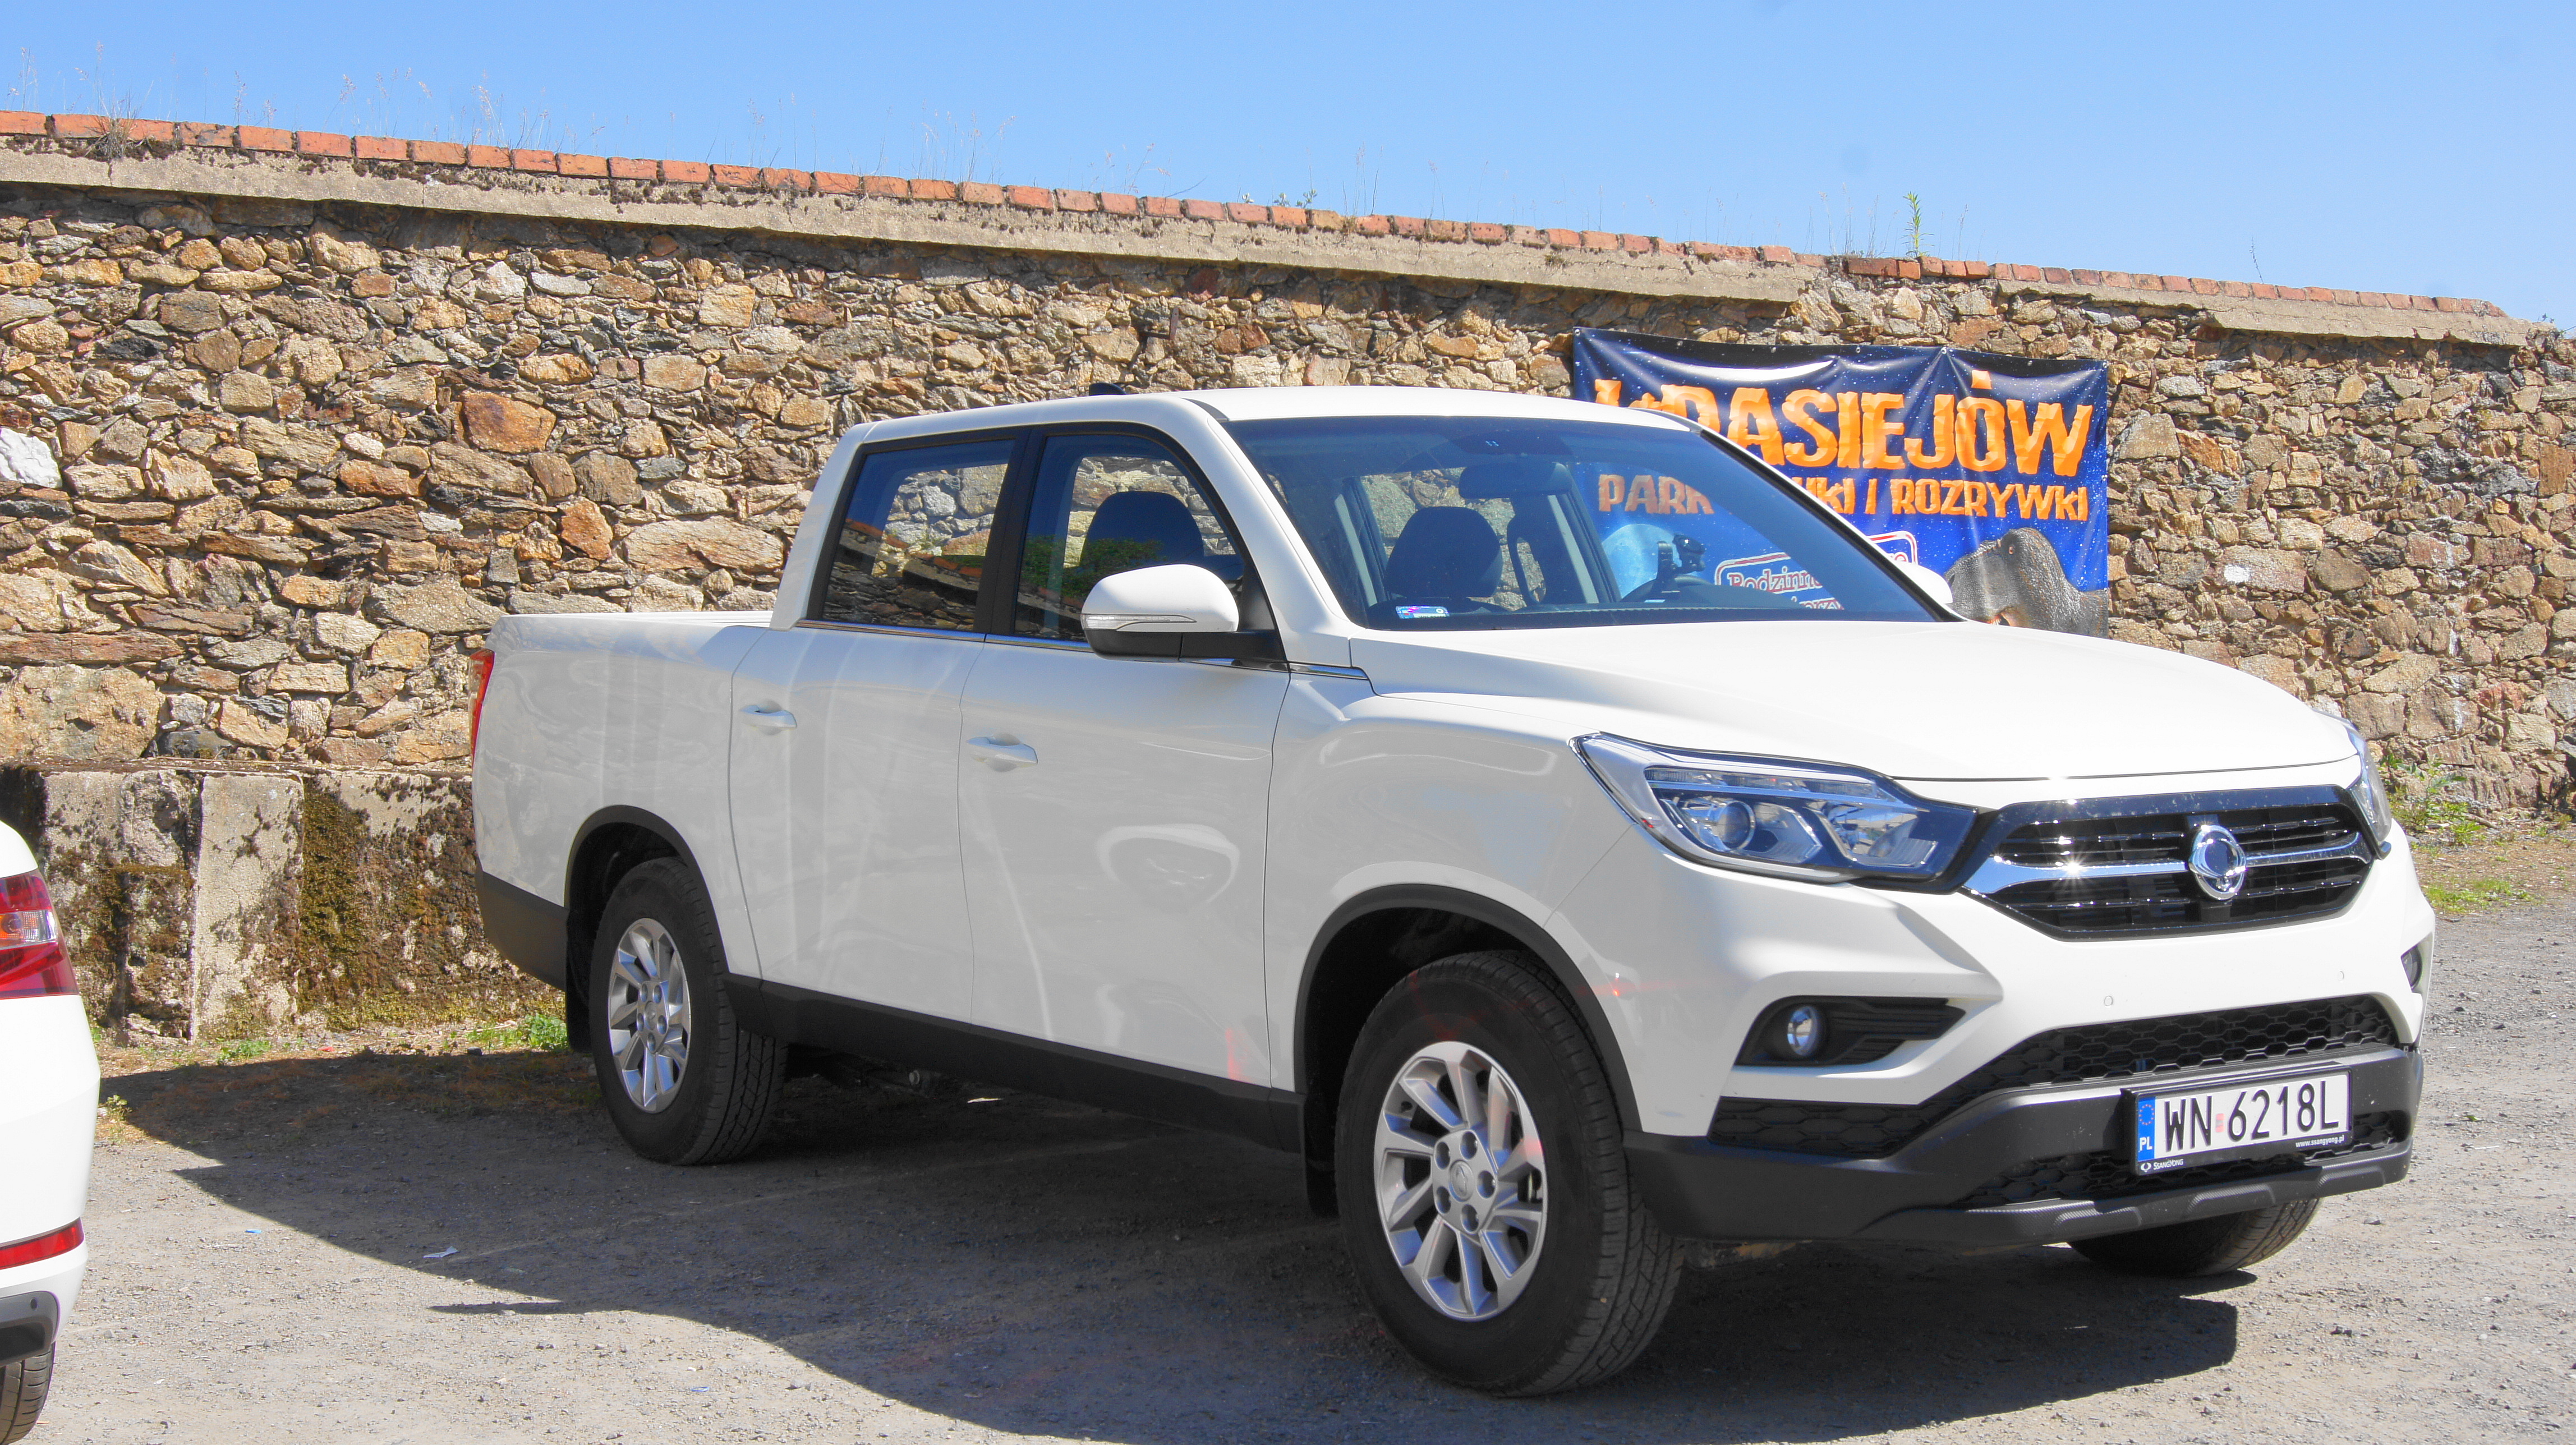 Ssangyong Musso Grand- Pick-Up Made In Korea - Motorozmaitosci.pl